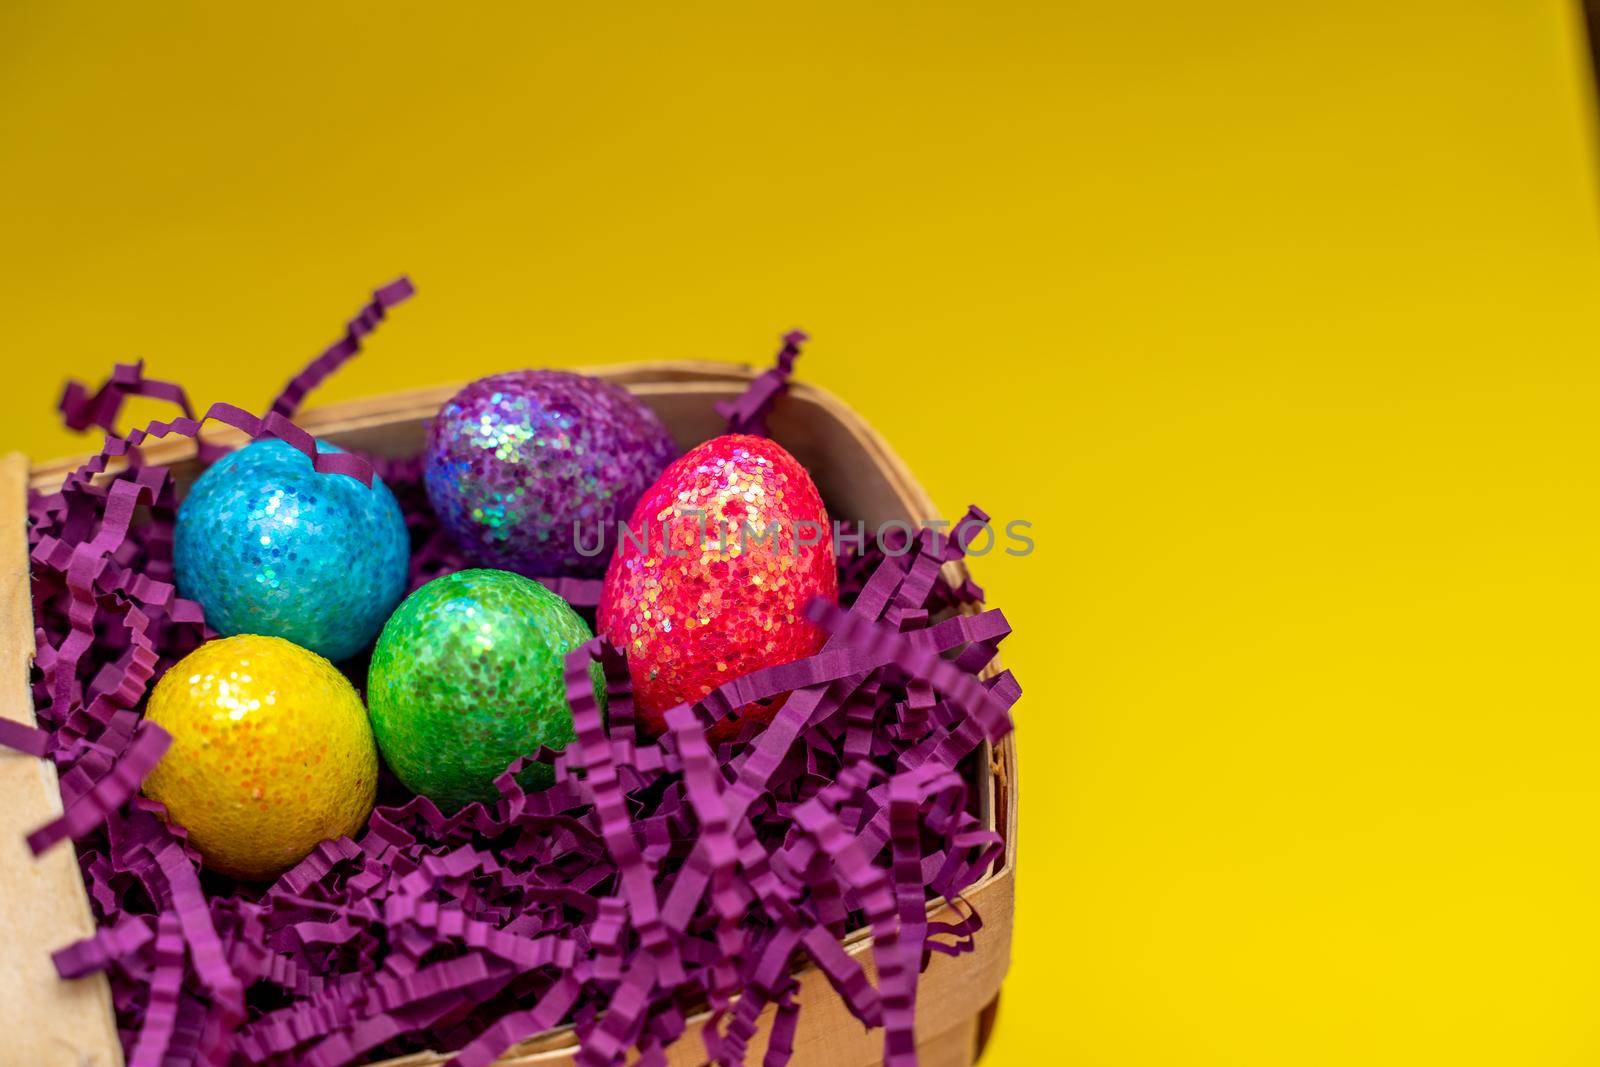 Easter composition from a basket and colored eggs prepared for the holiday on a yellow background.